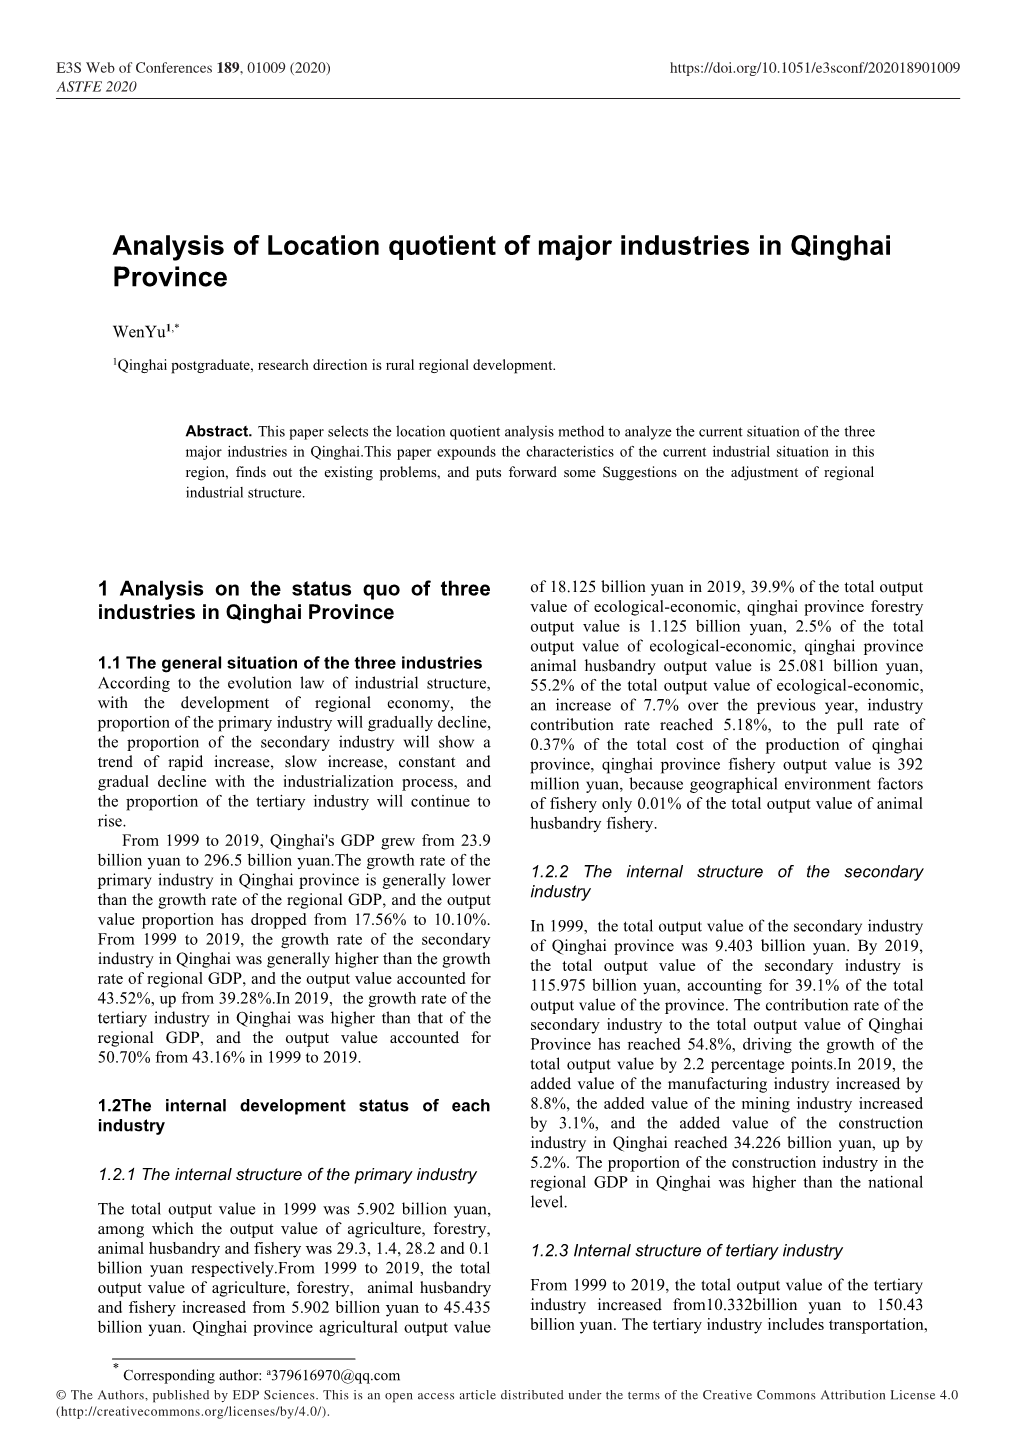 Analysis of Location Quotient of Major Industries in Qinghai Province